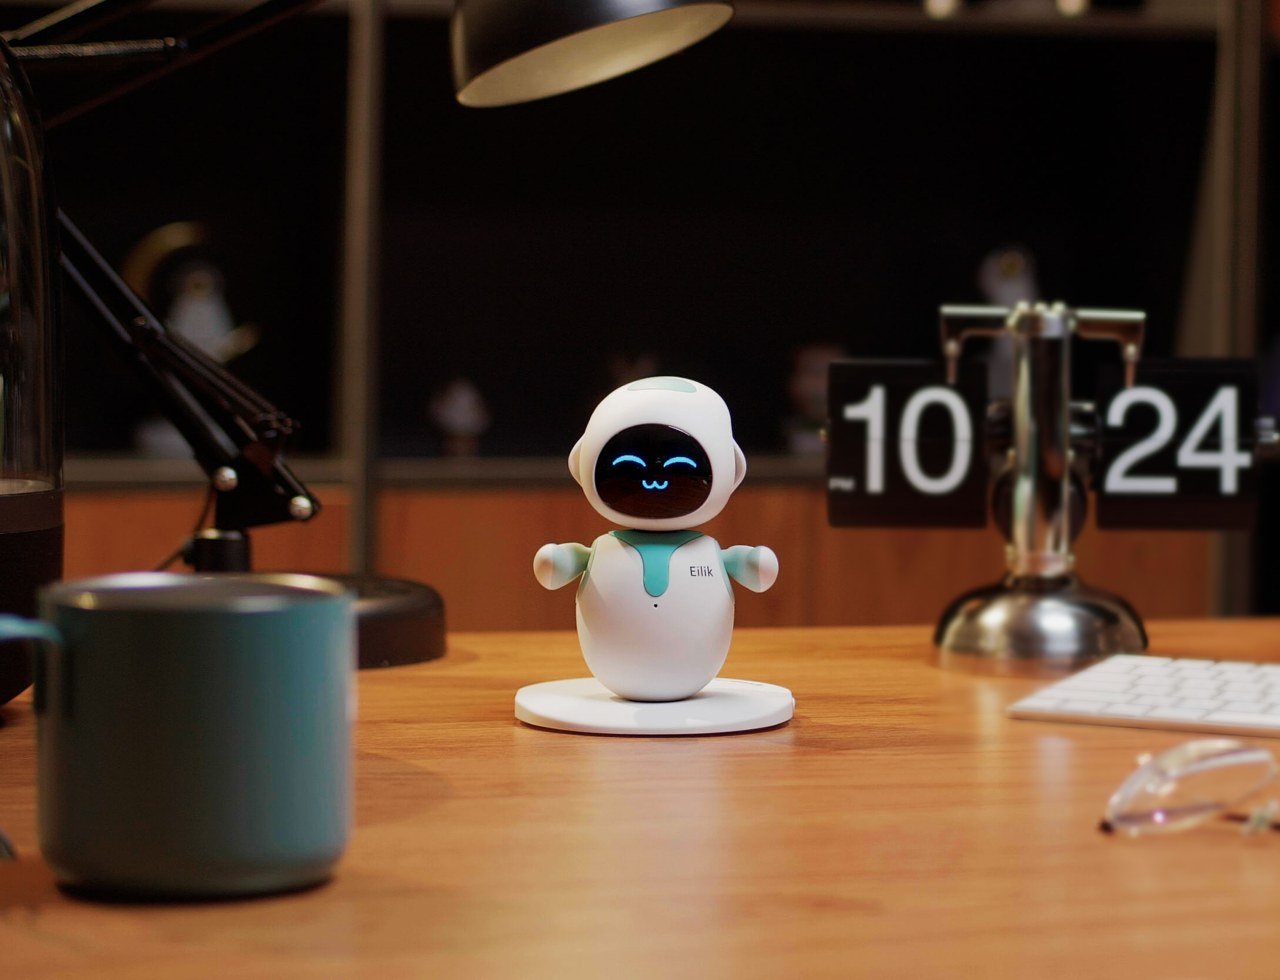 Meet Eilik, a feisty little AI robot that lives on your desk like a tiny  Tamagotchi with a personality - Yanko Design